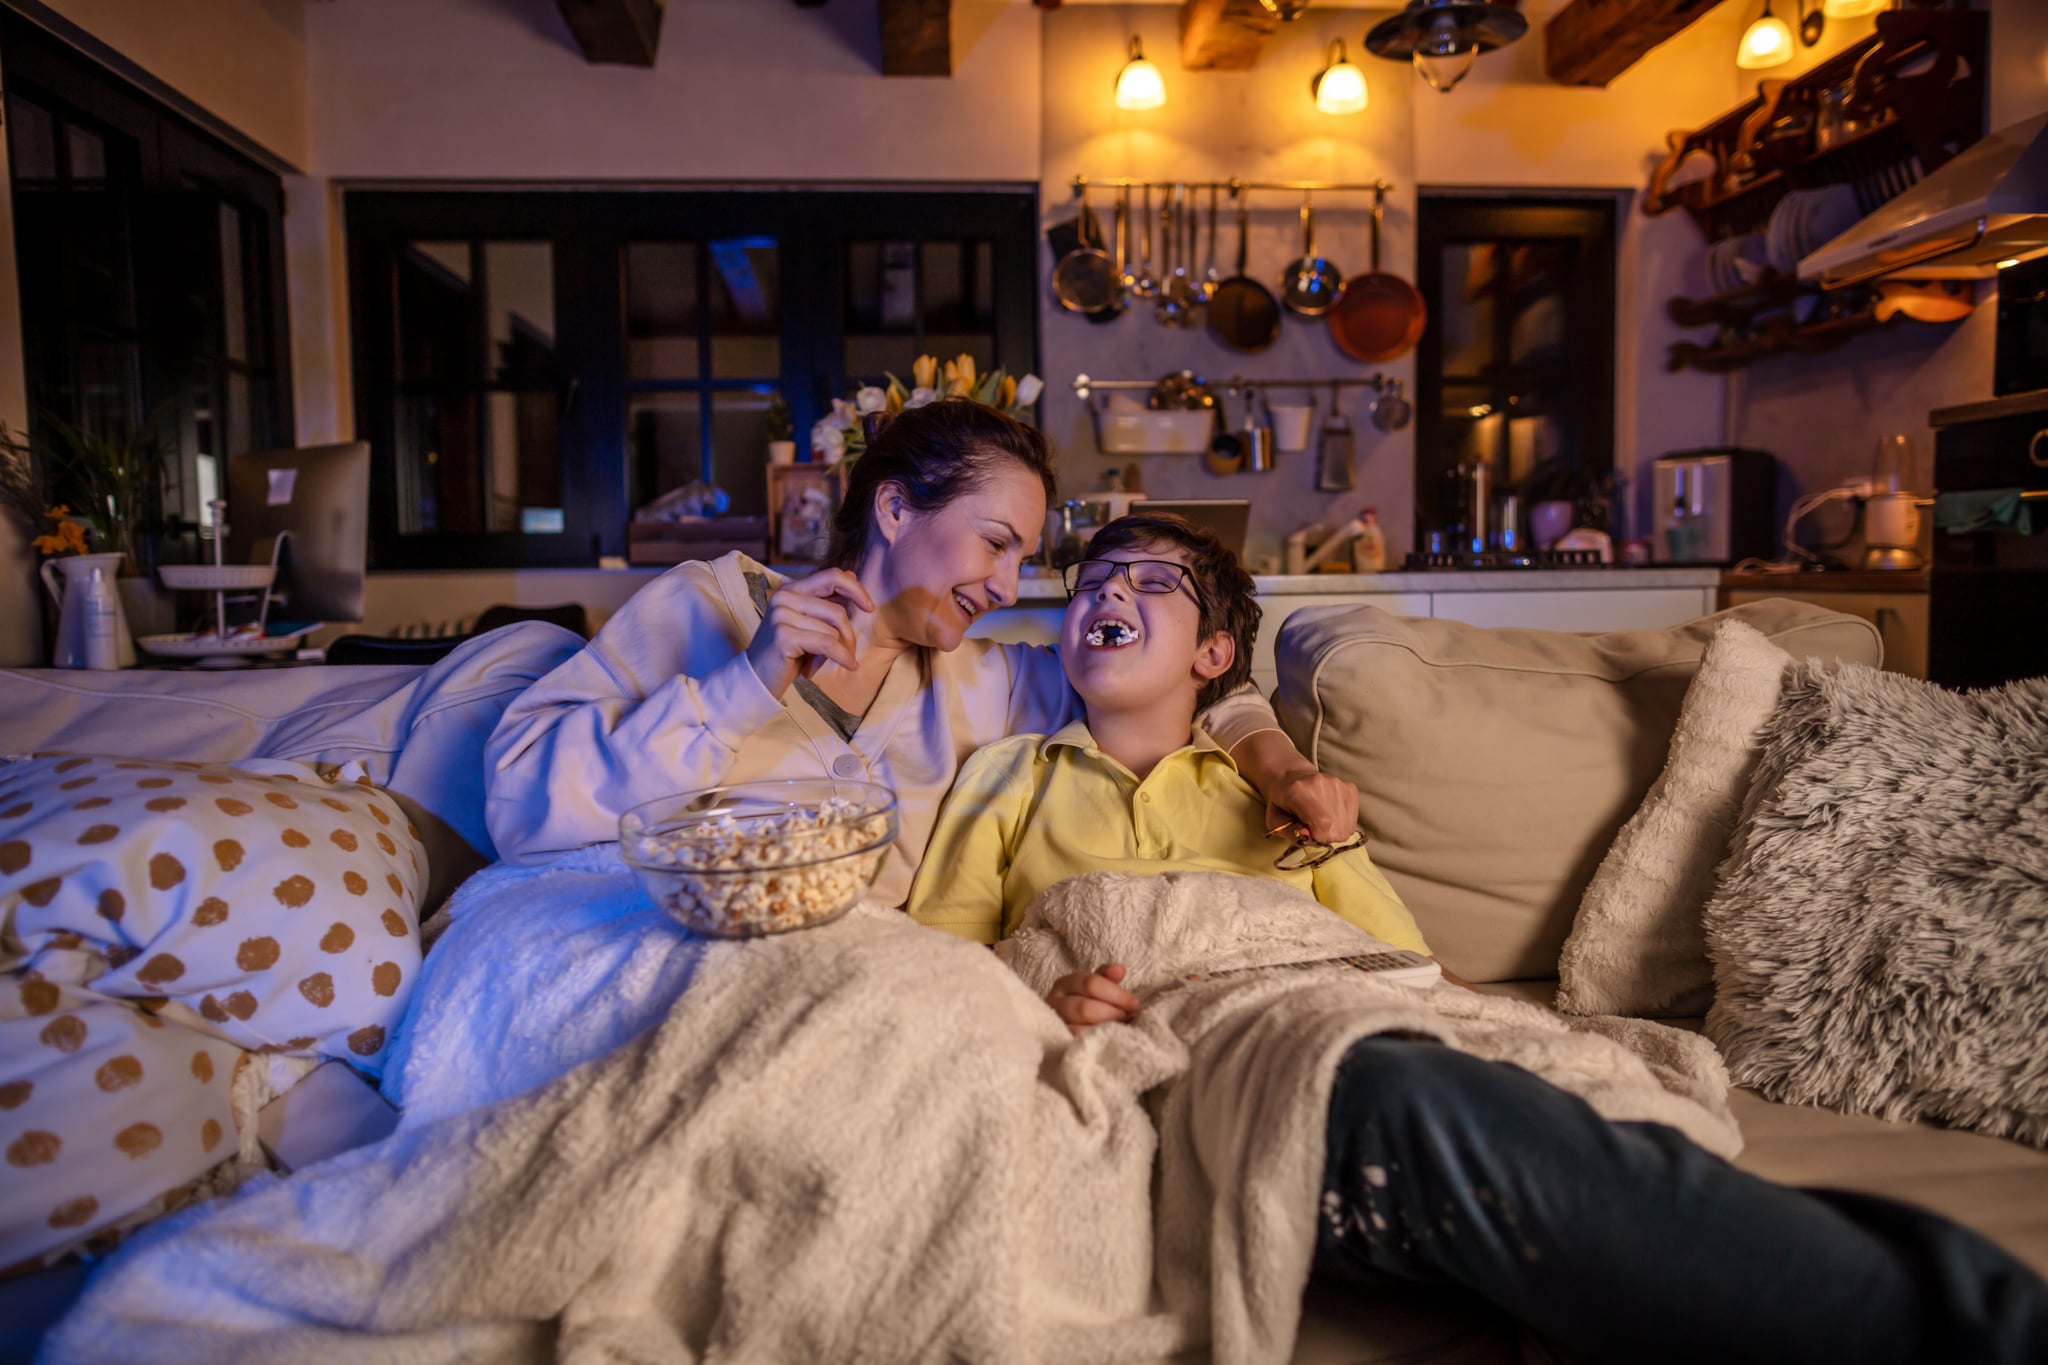 <p>Curling up on the couch and <a href="https://www.popsugar.com/family/feel-good-movies-for-kids-47307583" class="ga-track">watching a favorite flick</a> can keep families warm and snuggly as they pass the time. Draw numbers to see who gets to pick the first movie (and beyond, if you're embracing the "marathon" feature of this idea). Depending on the age of the child, families can also make popcorn and gather together their favorite treats to enjoy during the movie.</p>